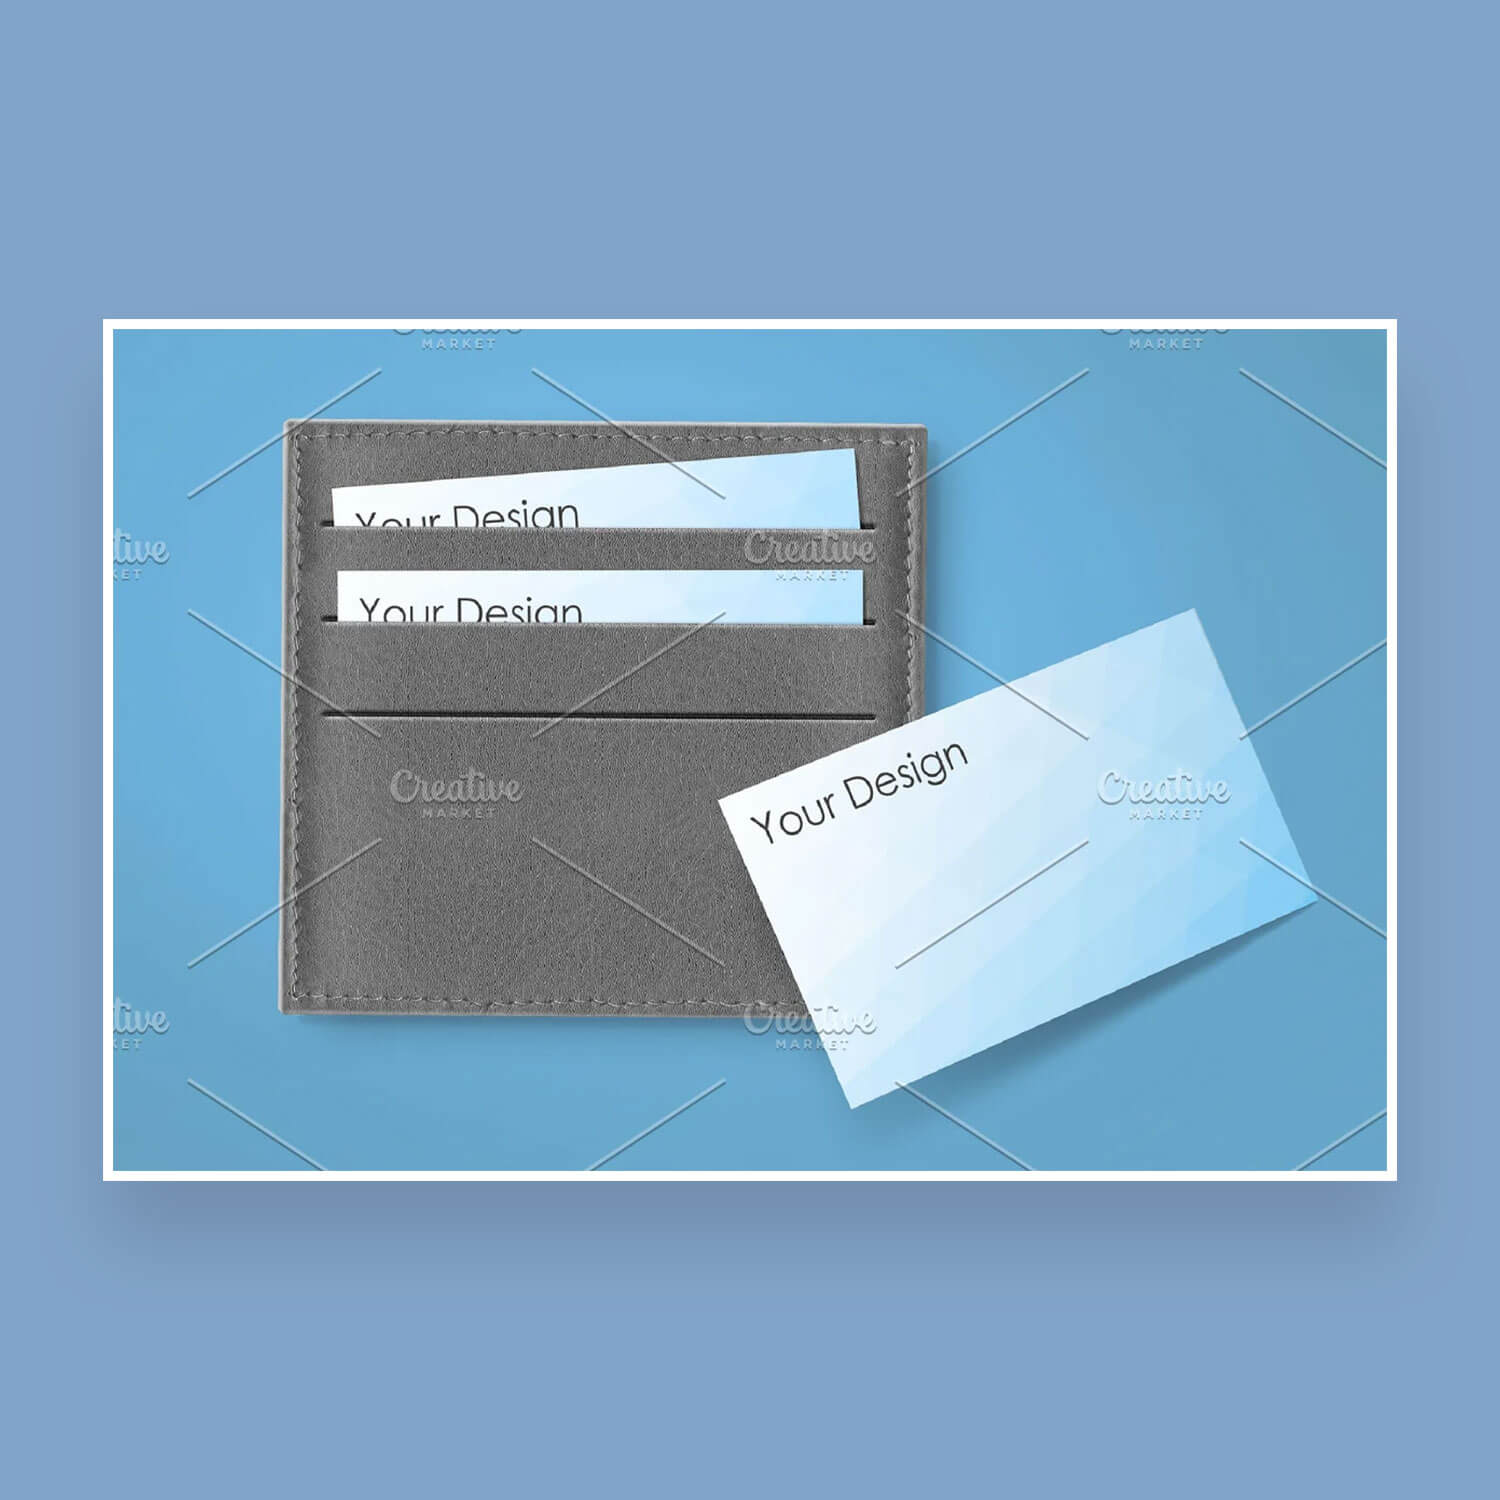 Light blue business cards from a purse.